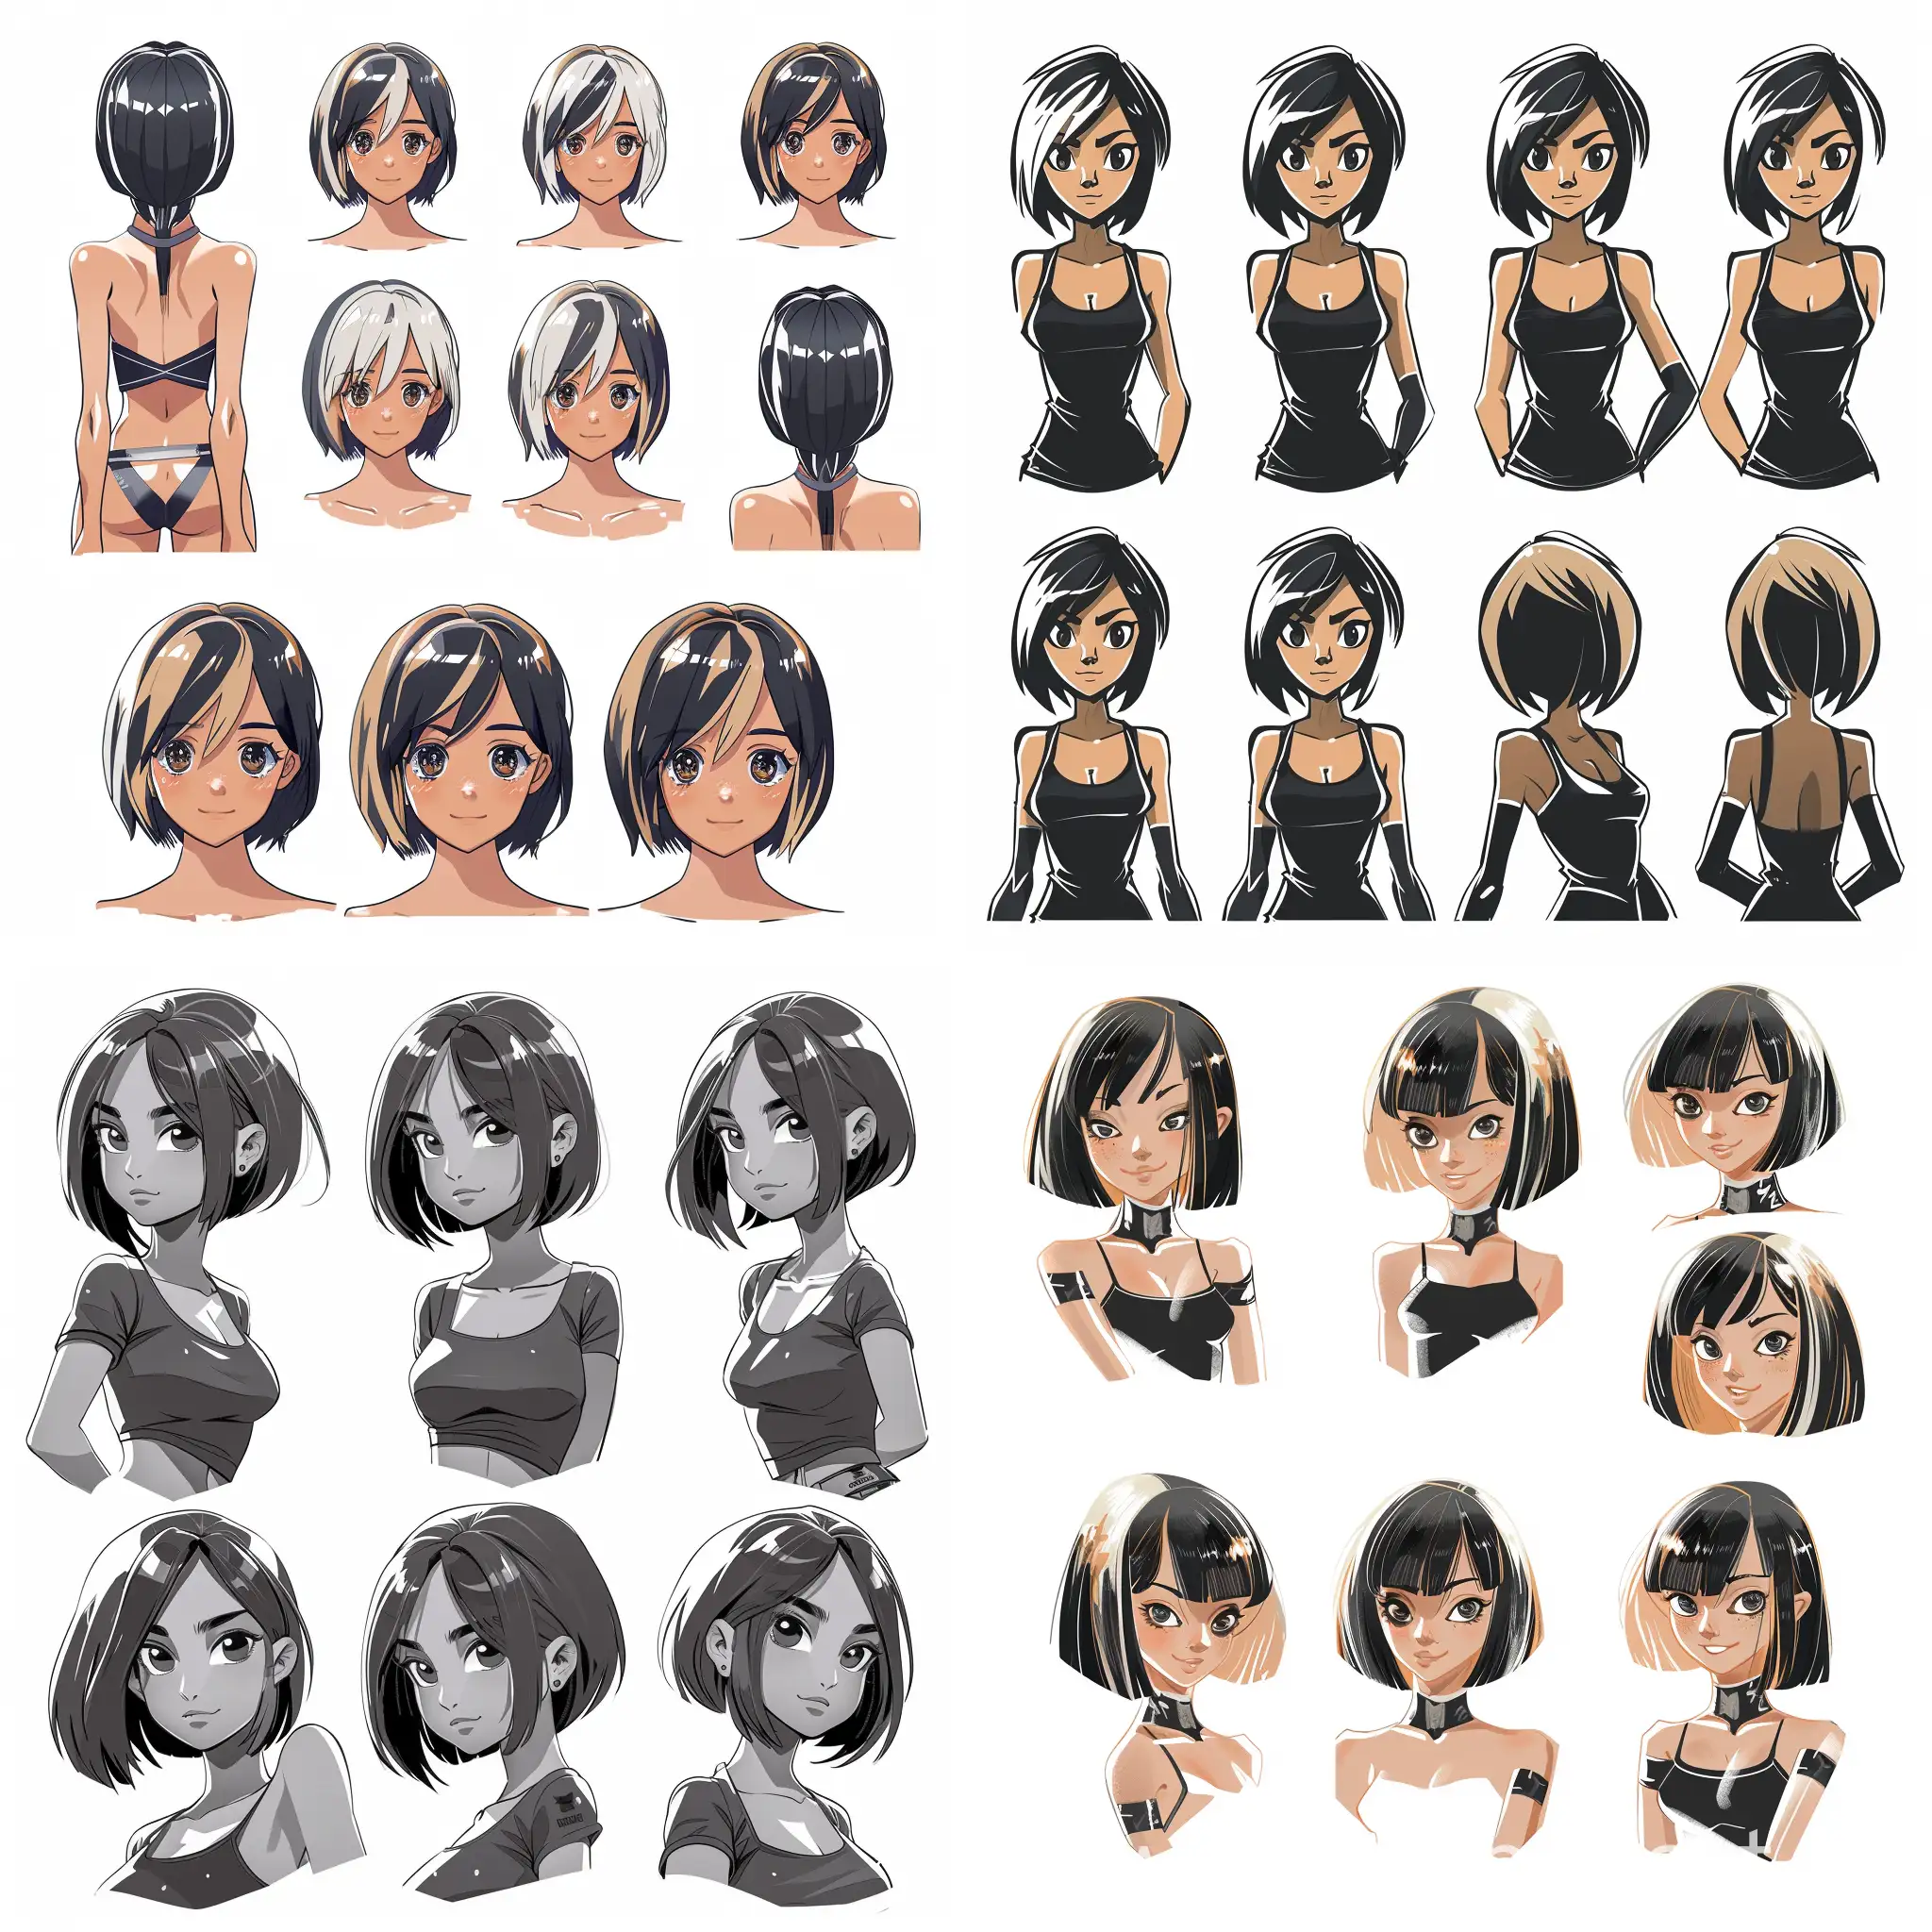 an illustrated character with a storybook style in seven different whole-body postures and gestures. She has short straight hair with blended black and light brown tones. Her eyes medium are expressive, with black irises. The character is wearing simple attire her fit physique, comic art styles. The background is plain white, keeping the focus solely on the detailed character illustration itself.